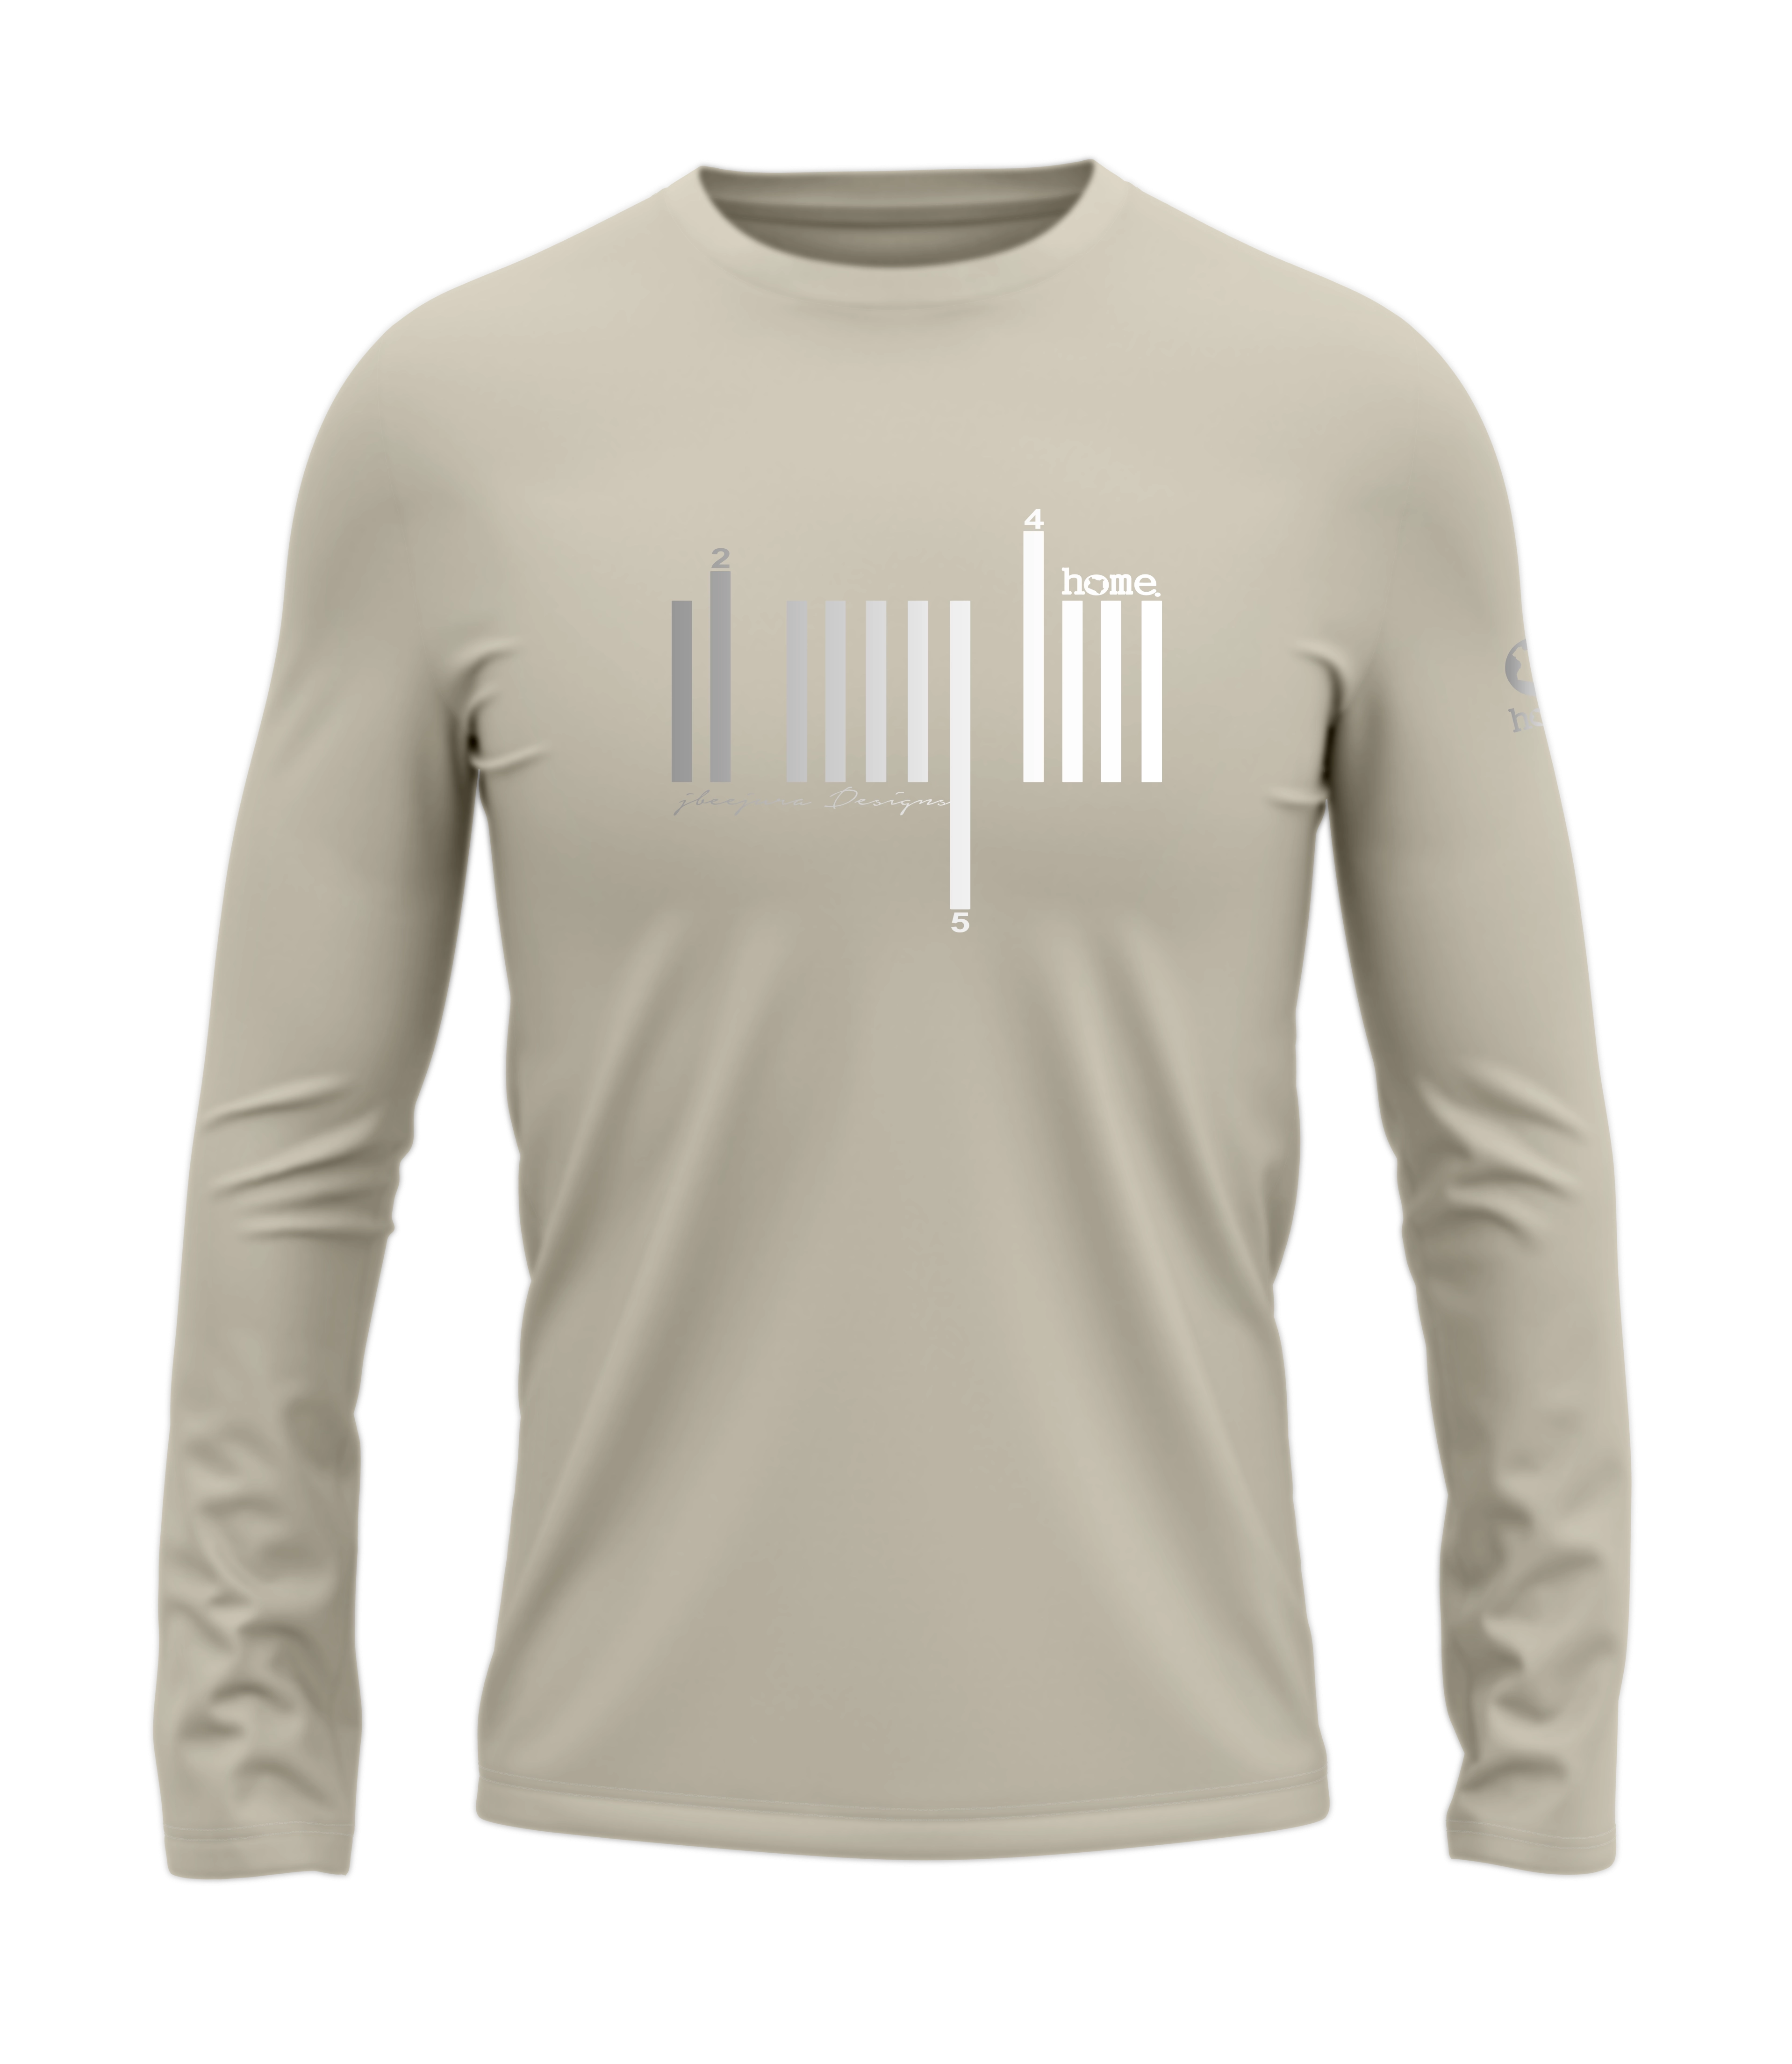 home_254 LONG-SLEEVED NUDE T-SHIRT WITH A SILVER BARS PRINT – COTTON PLUS FABRIC